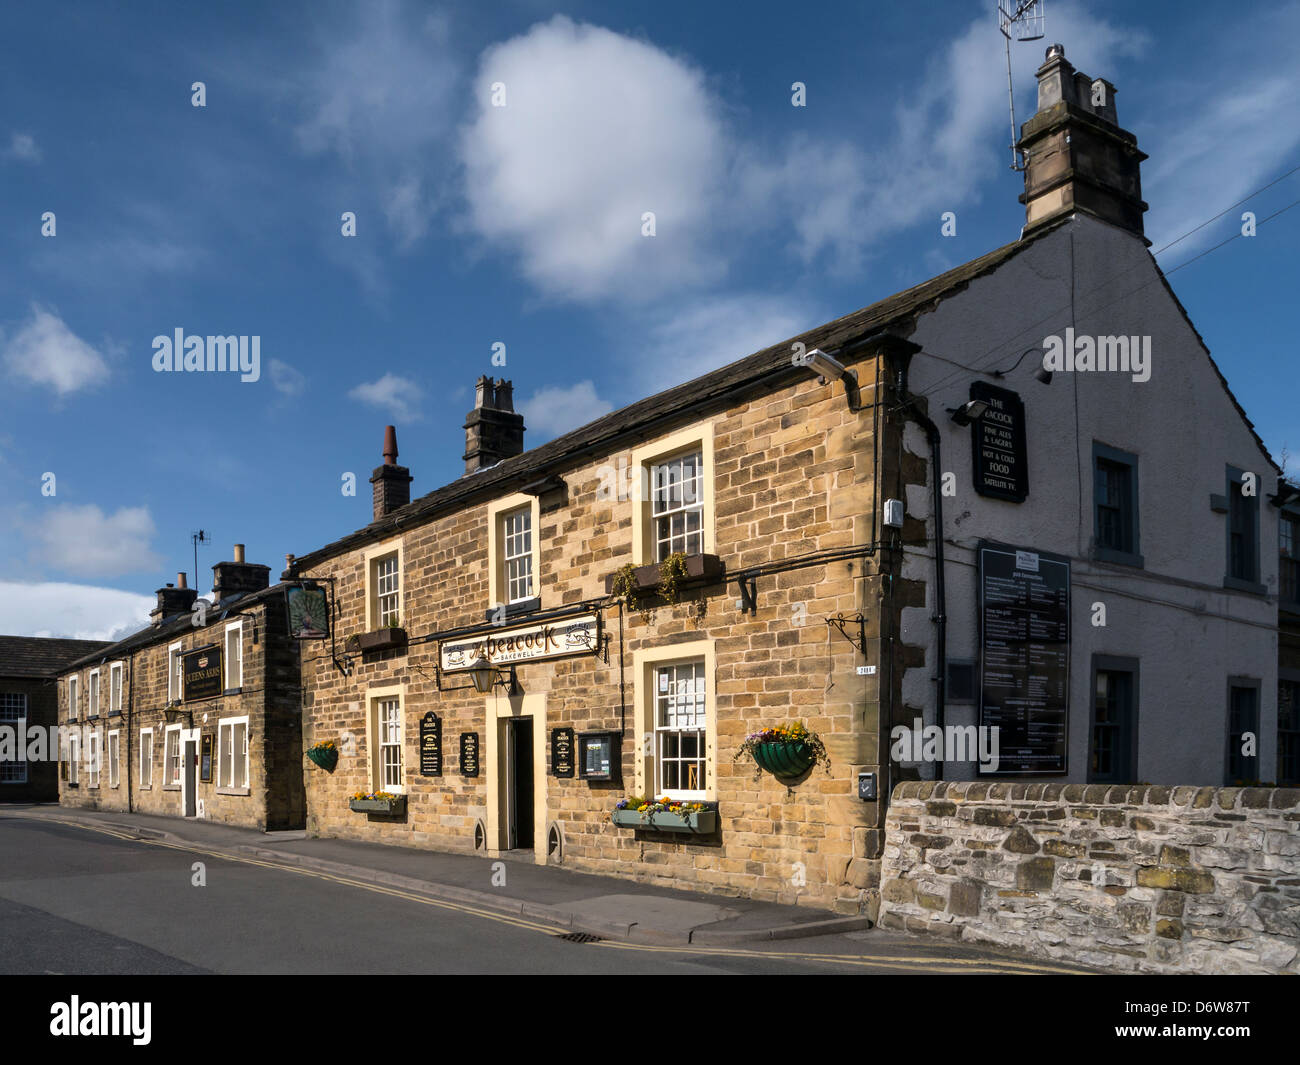 BAKEWELL, DERBYSHIRE, UK - APRIL 18, 2013:  The Peacock Pub housed in an old coaching inn in Market Street Stock Photo